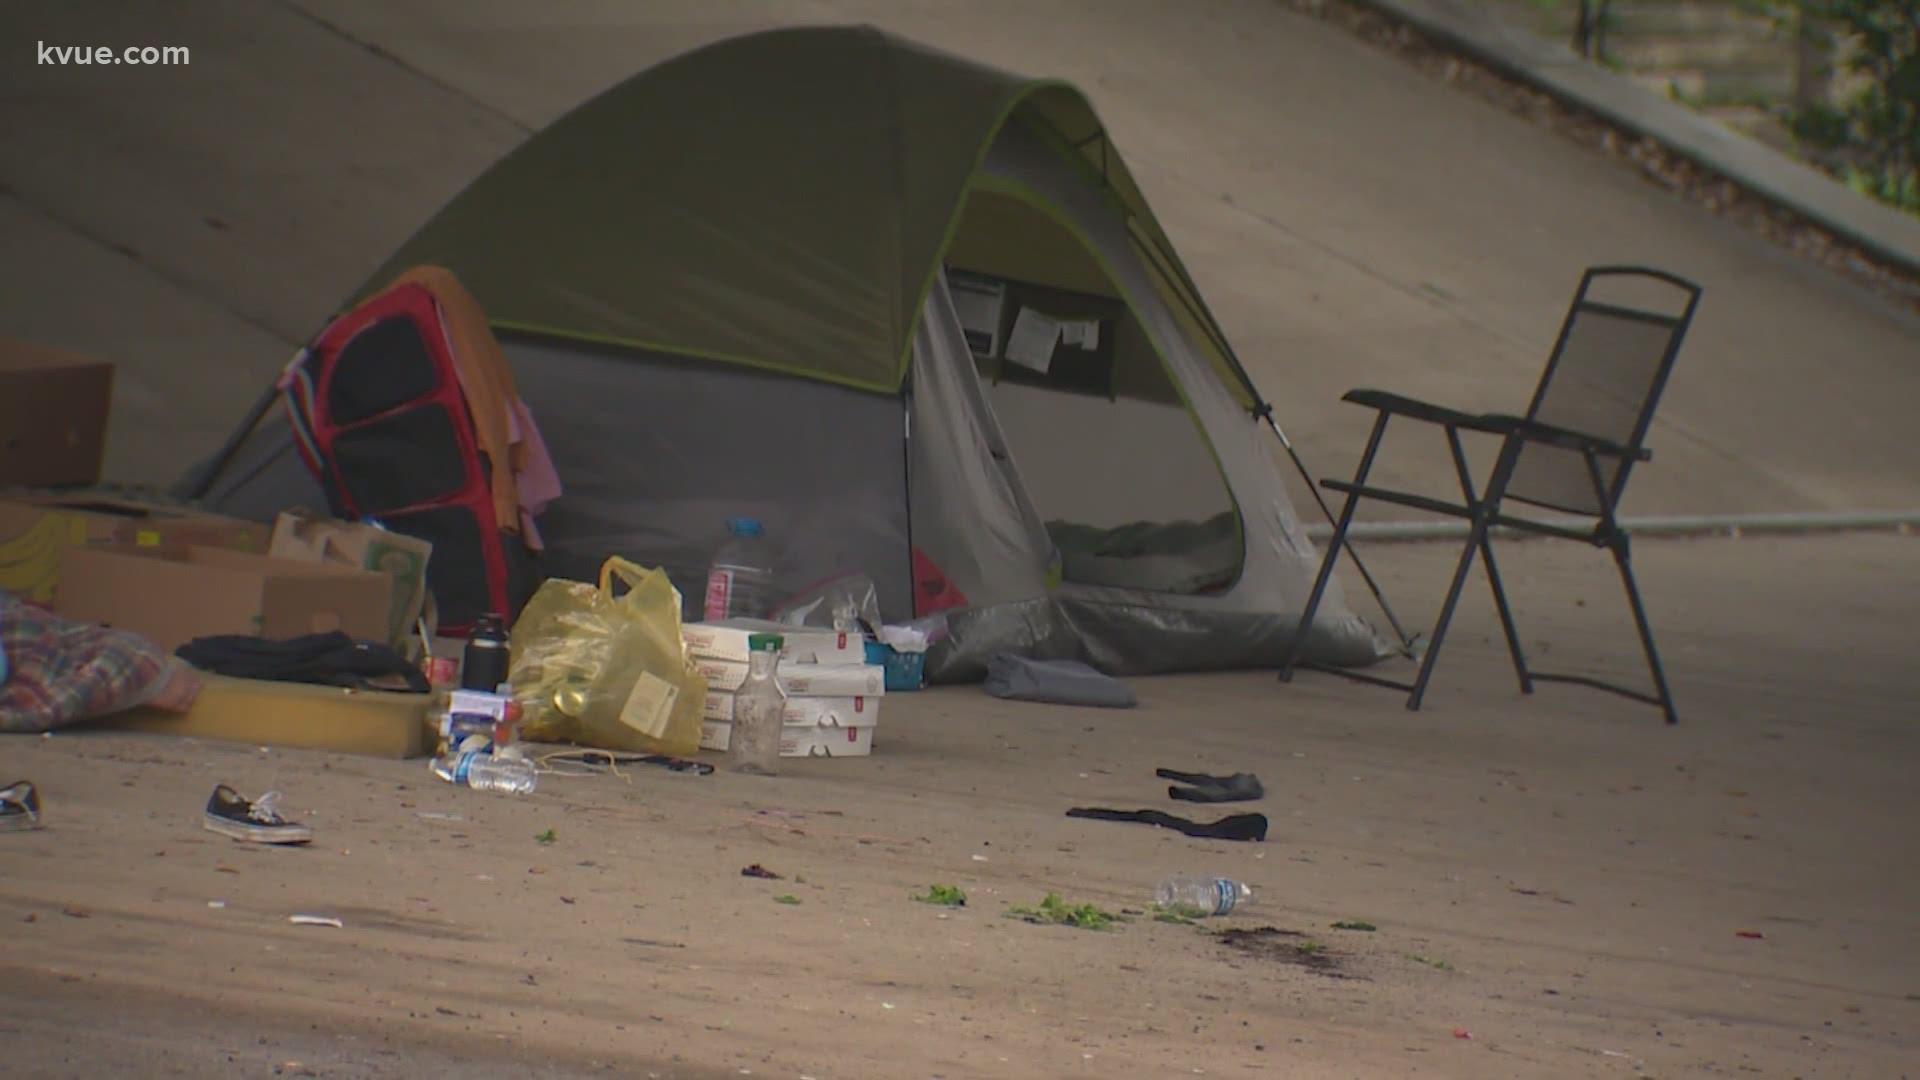 The City released a four-phased approach to reinstating the camping ban.